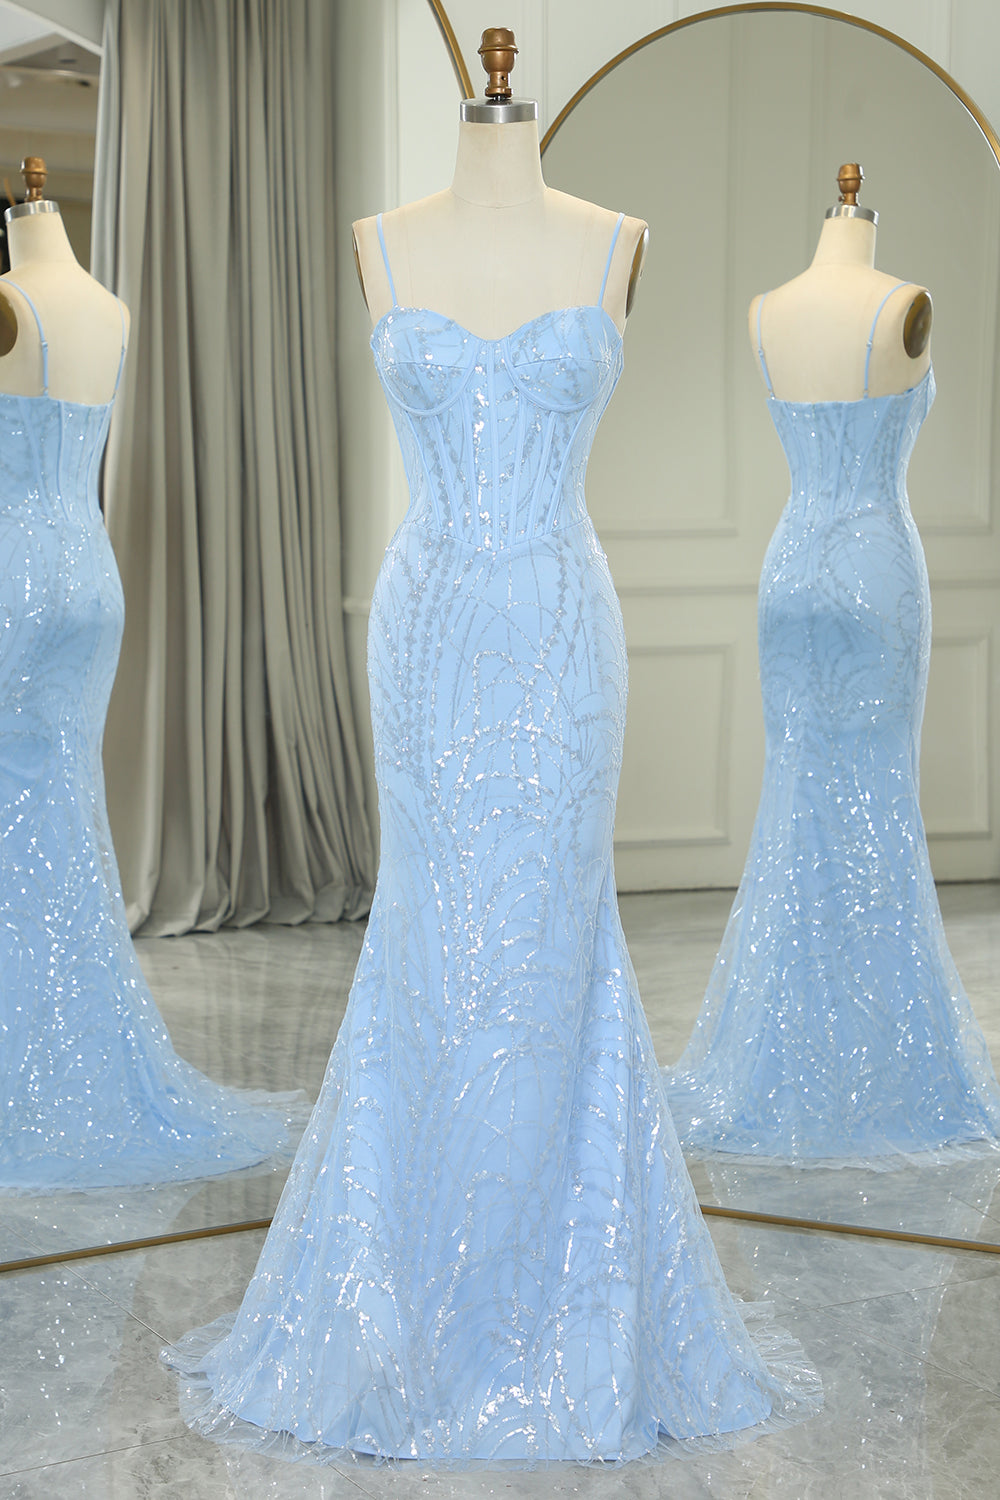 Sparkly Light Blue Mermaid Long Prom Dress With Sequined Appliques